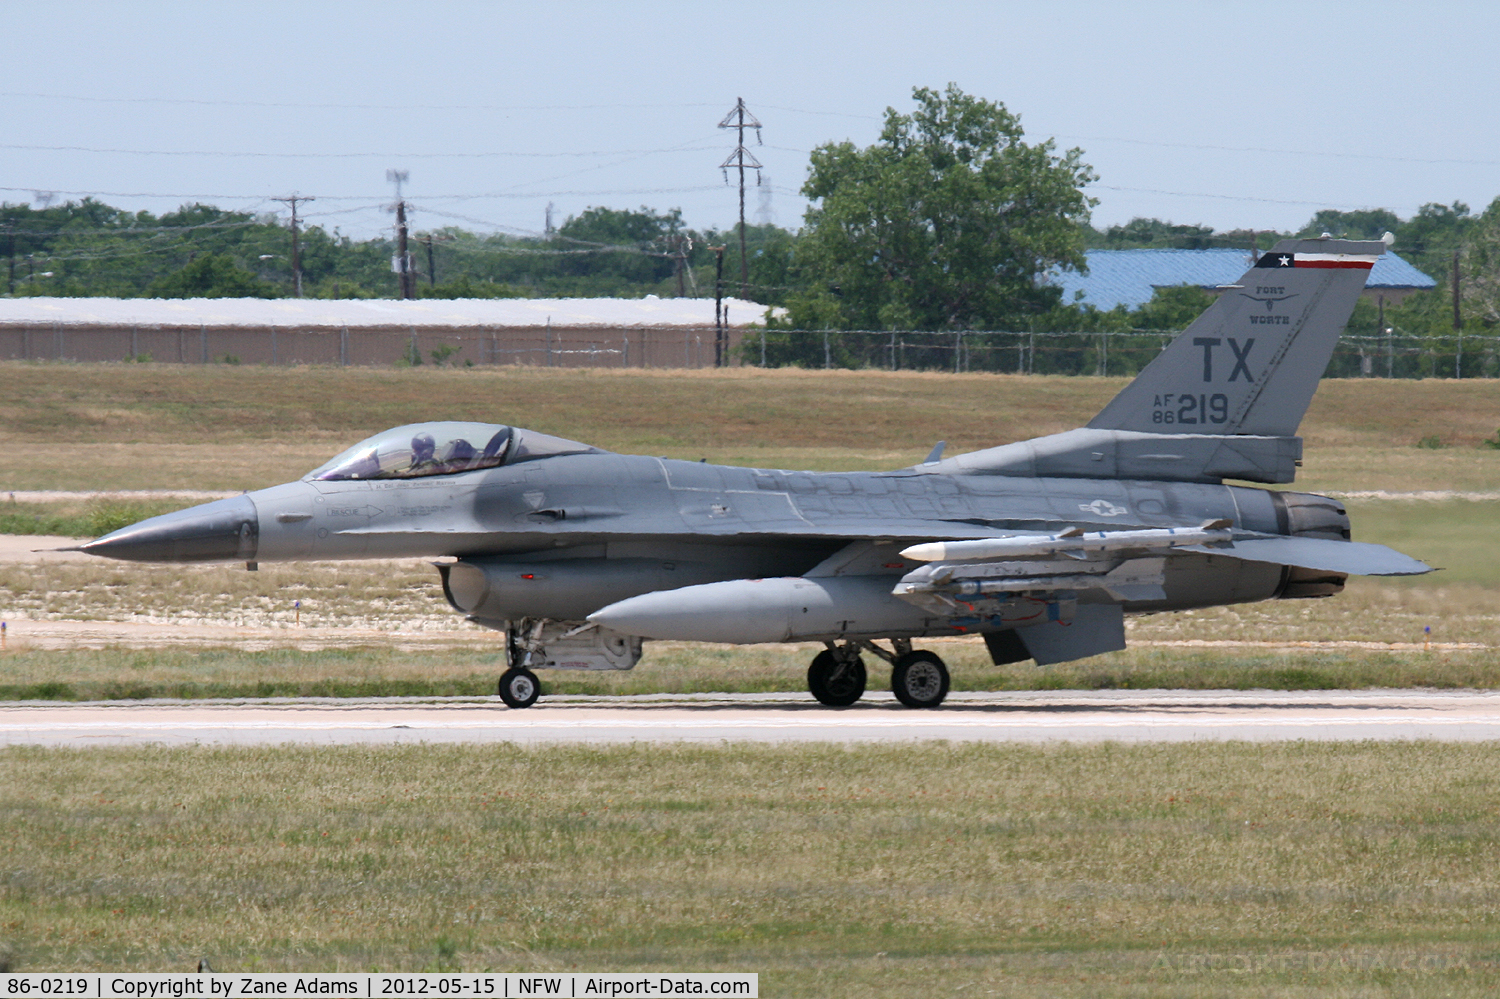 86-0219, 1986 General Dynamics F-16C Fighting Falcon C/N 5C-325, 301st Fighter Wing F-16 at NASJRB Fort Worth